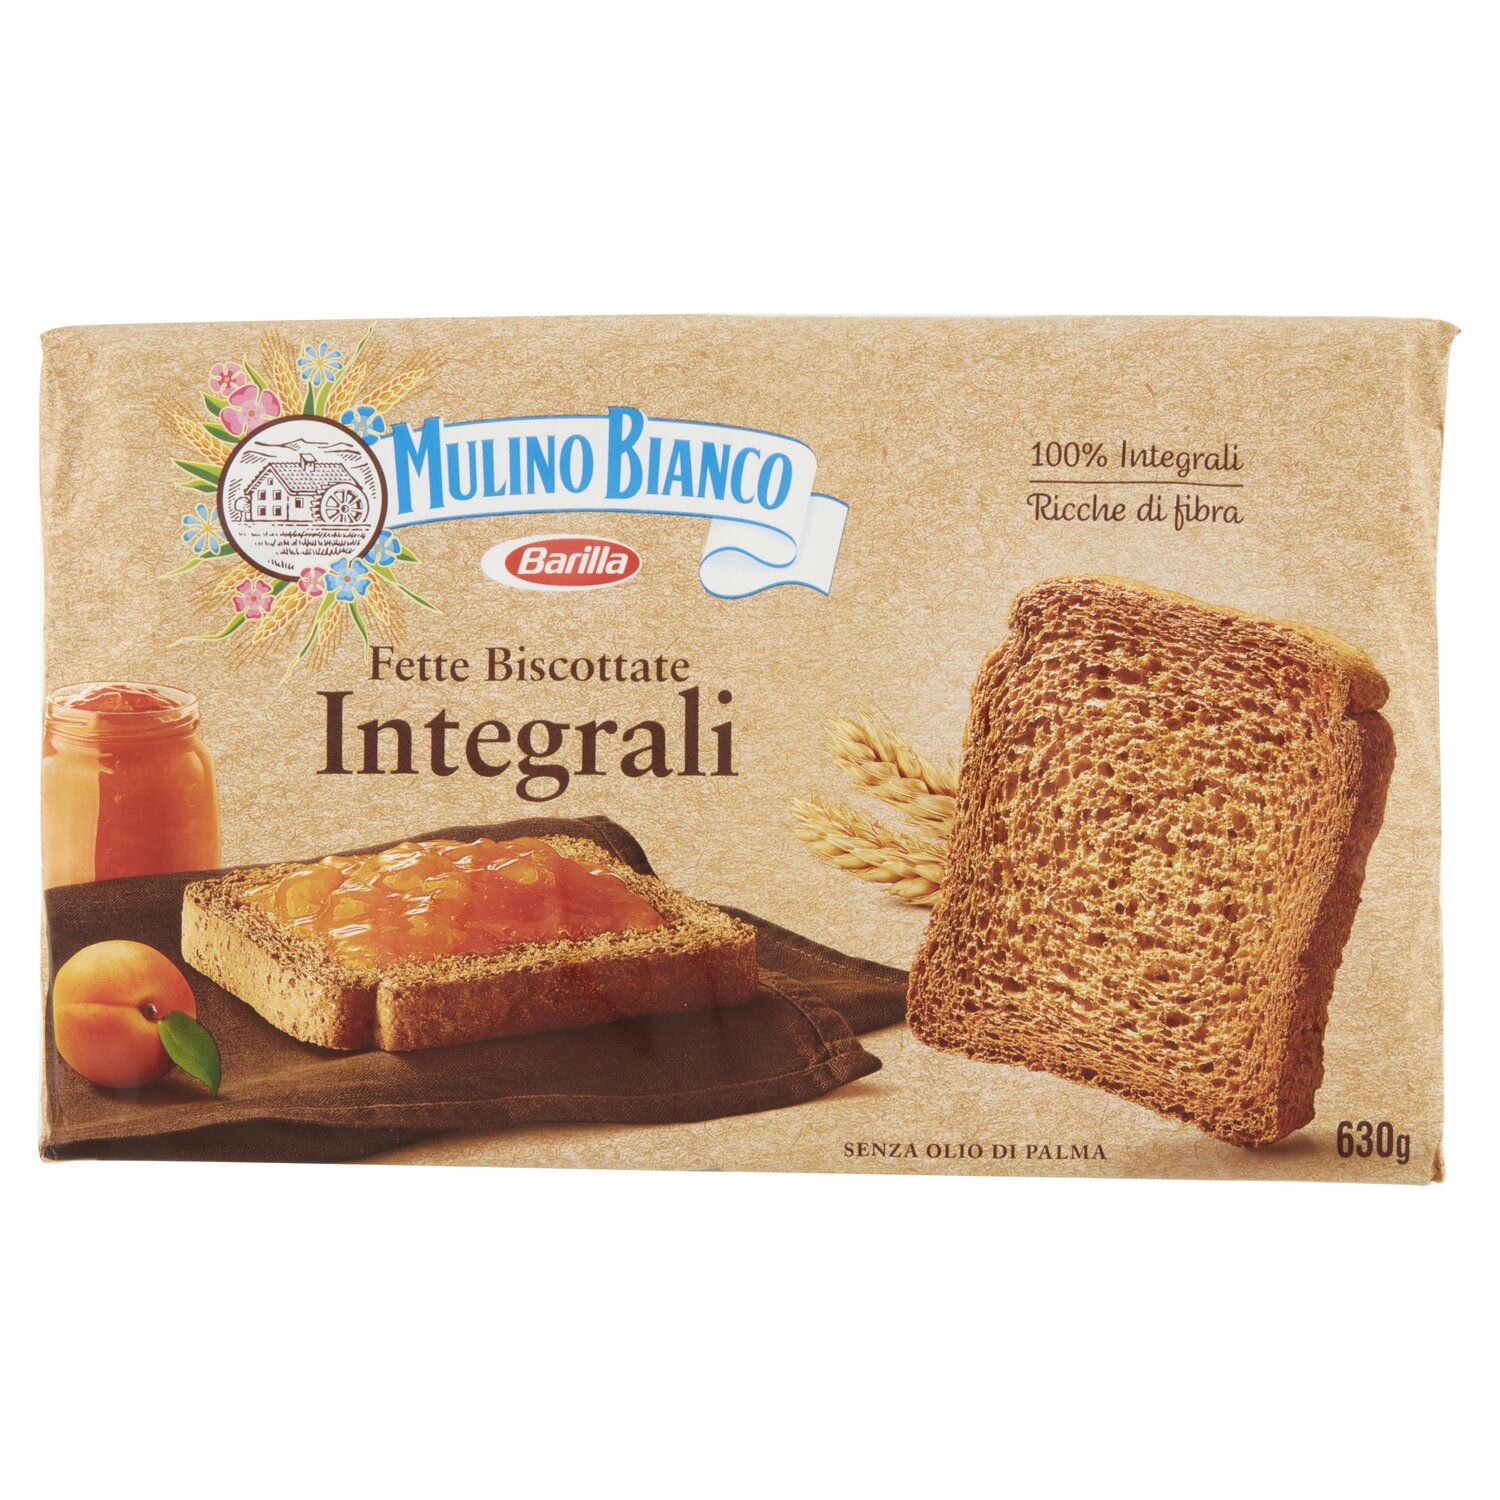 Mulino Bianco: Whole Wheat Fette Biscottate Italian Toast – 630gr  (22.22oz). “Imported from Italy” – Terra World Wide